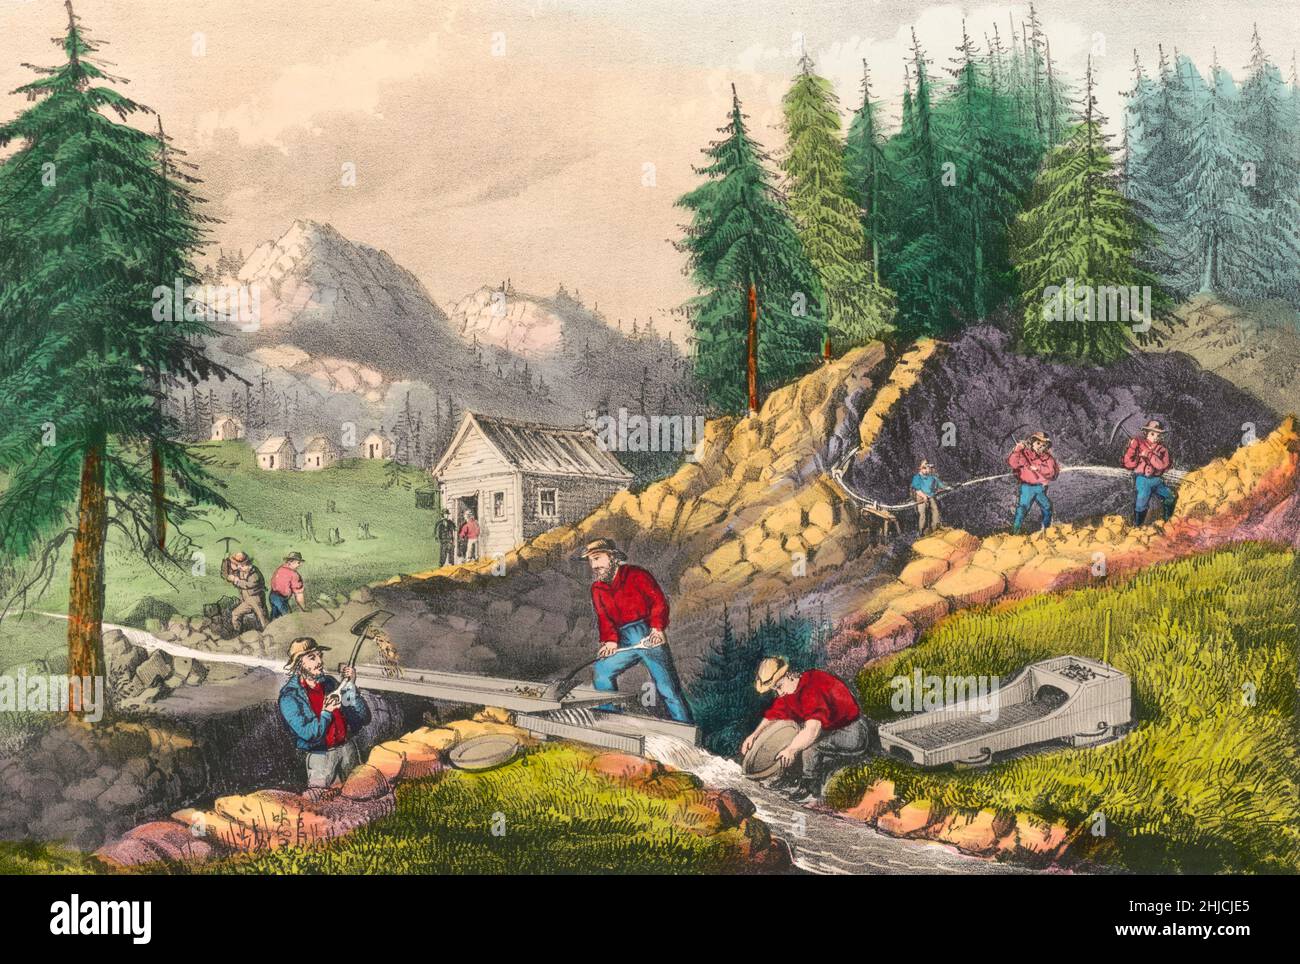 California gold miners shoveling sand from the stream into a sluice while one miner pans for gold in the same stream. The California Gold Rush began in 1848, when gold was found at Sutter's Mill in Coloma, California. Currier & Ives, 1871. Stock Photo